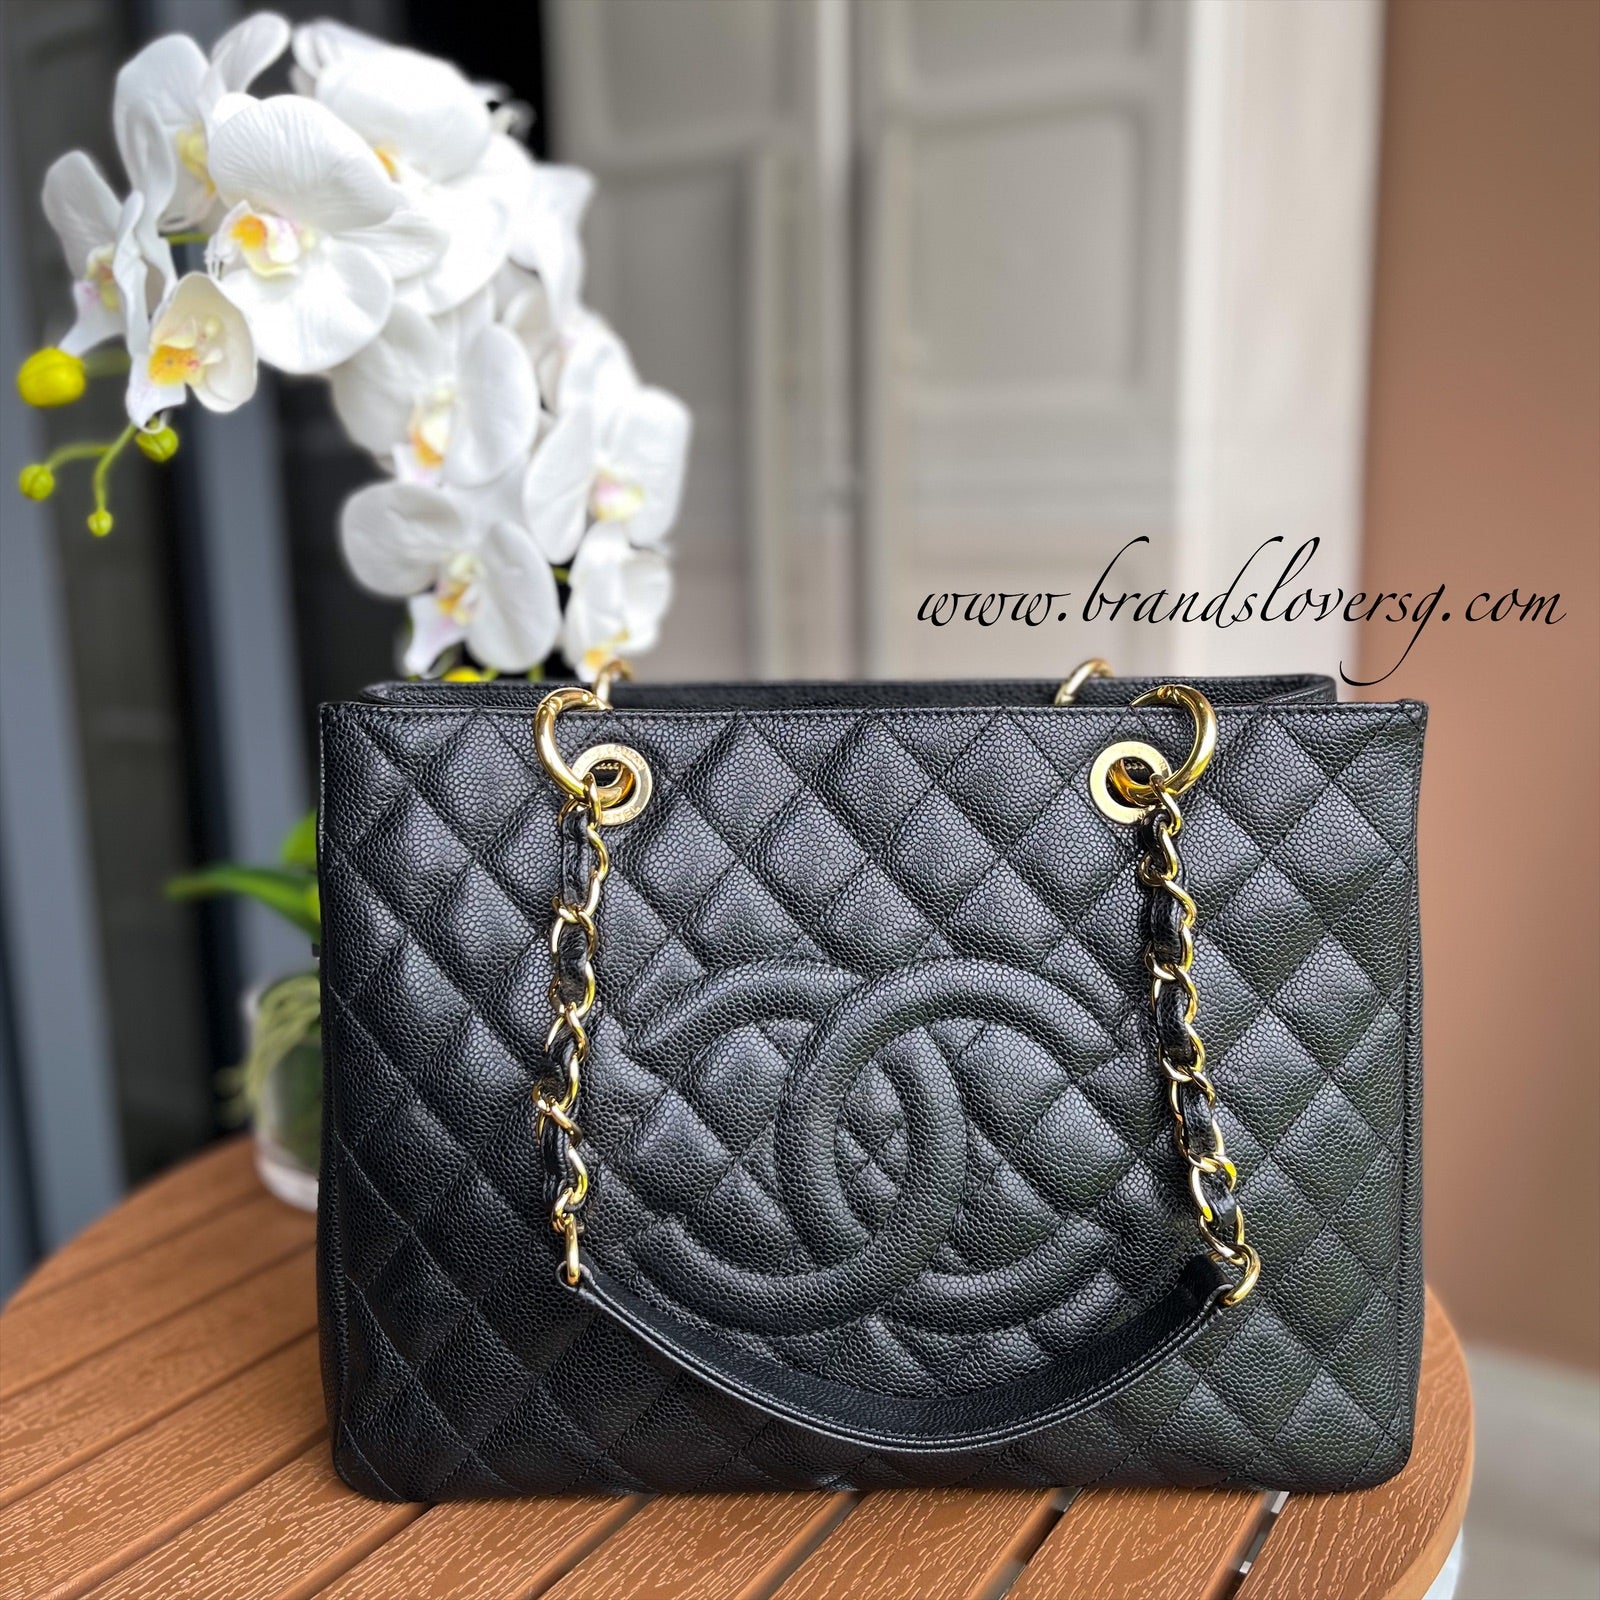 Chanel Grand Tote - 51 For Sale on 1stDibs  chanel grand shopping tote  price 2021, chanel grand shopping tote new, chanel grand shopping tote  original price